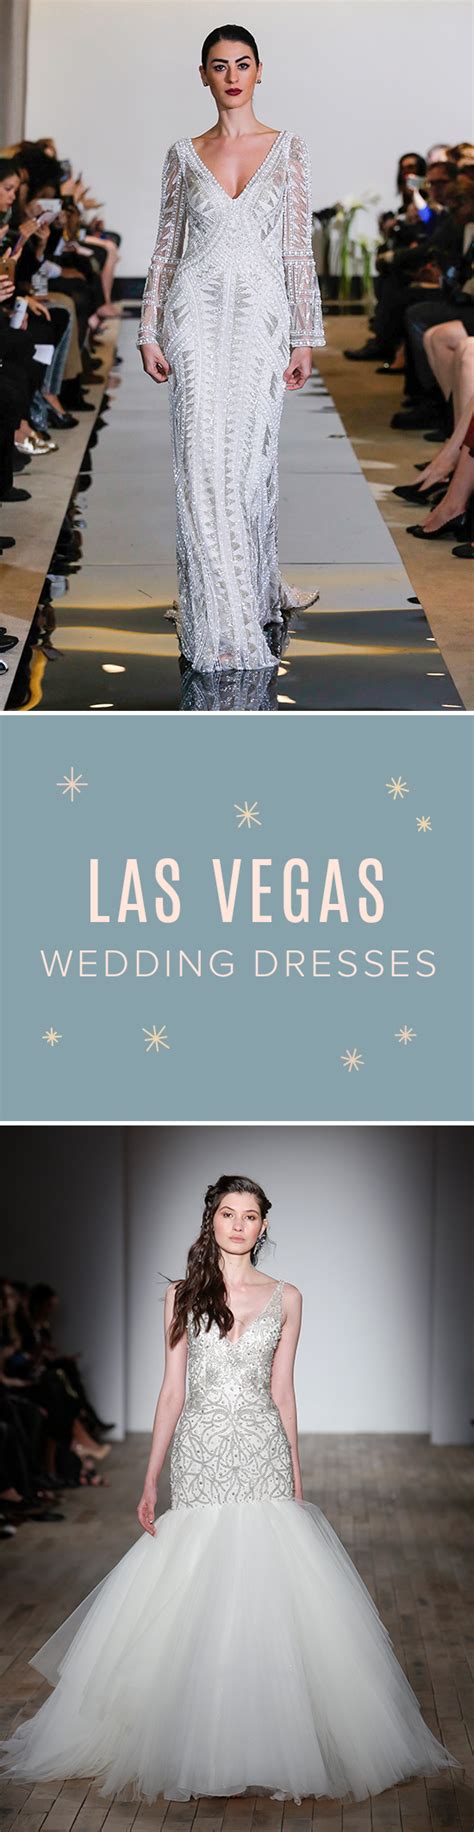 Las Vegas Wedding Dresses When It Comes To Choosing A Dress For Your